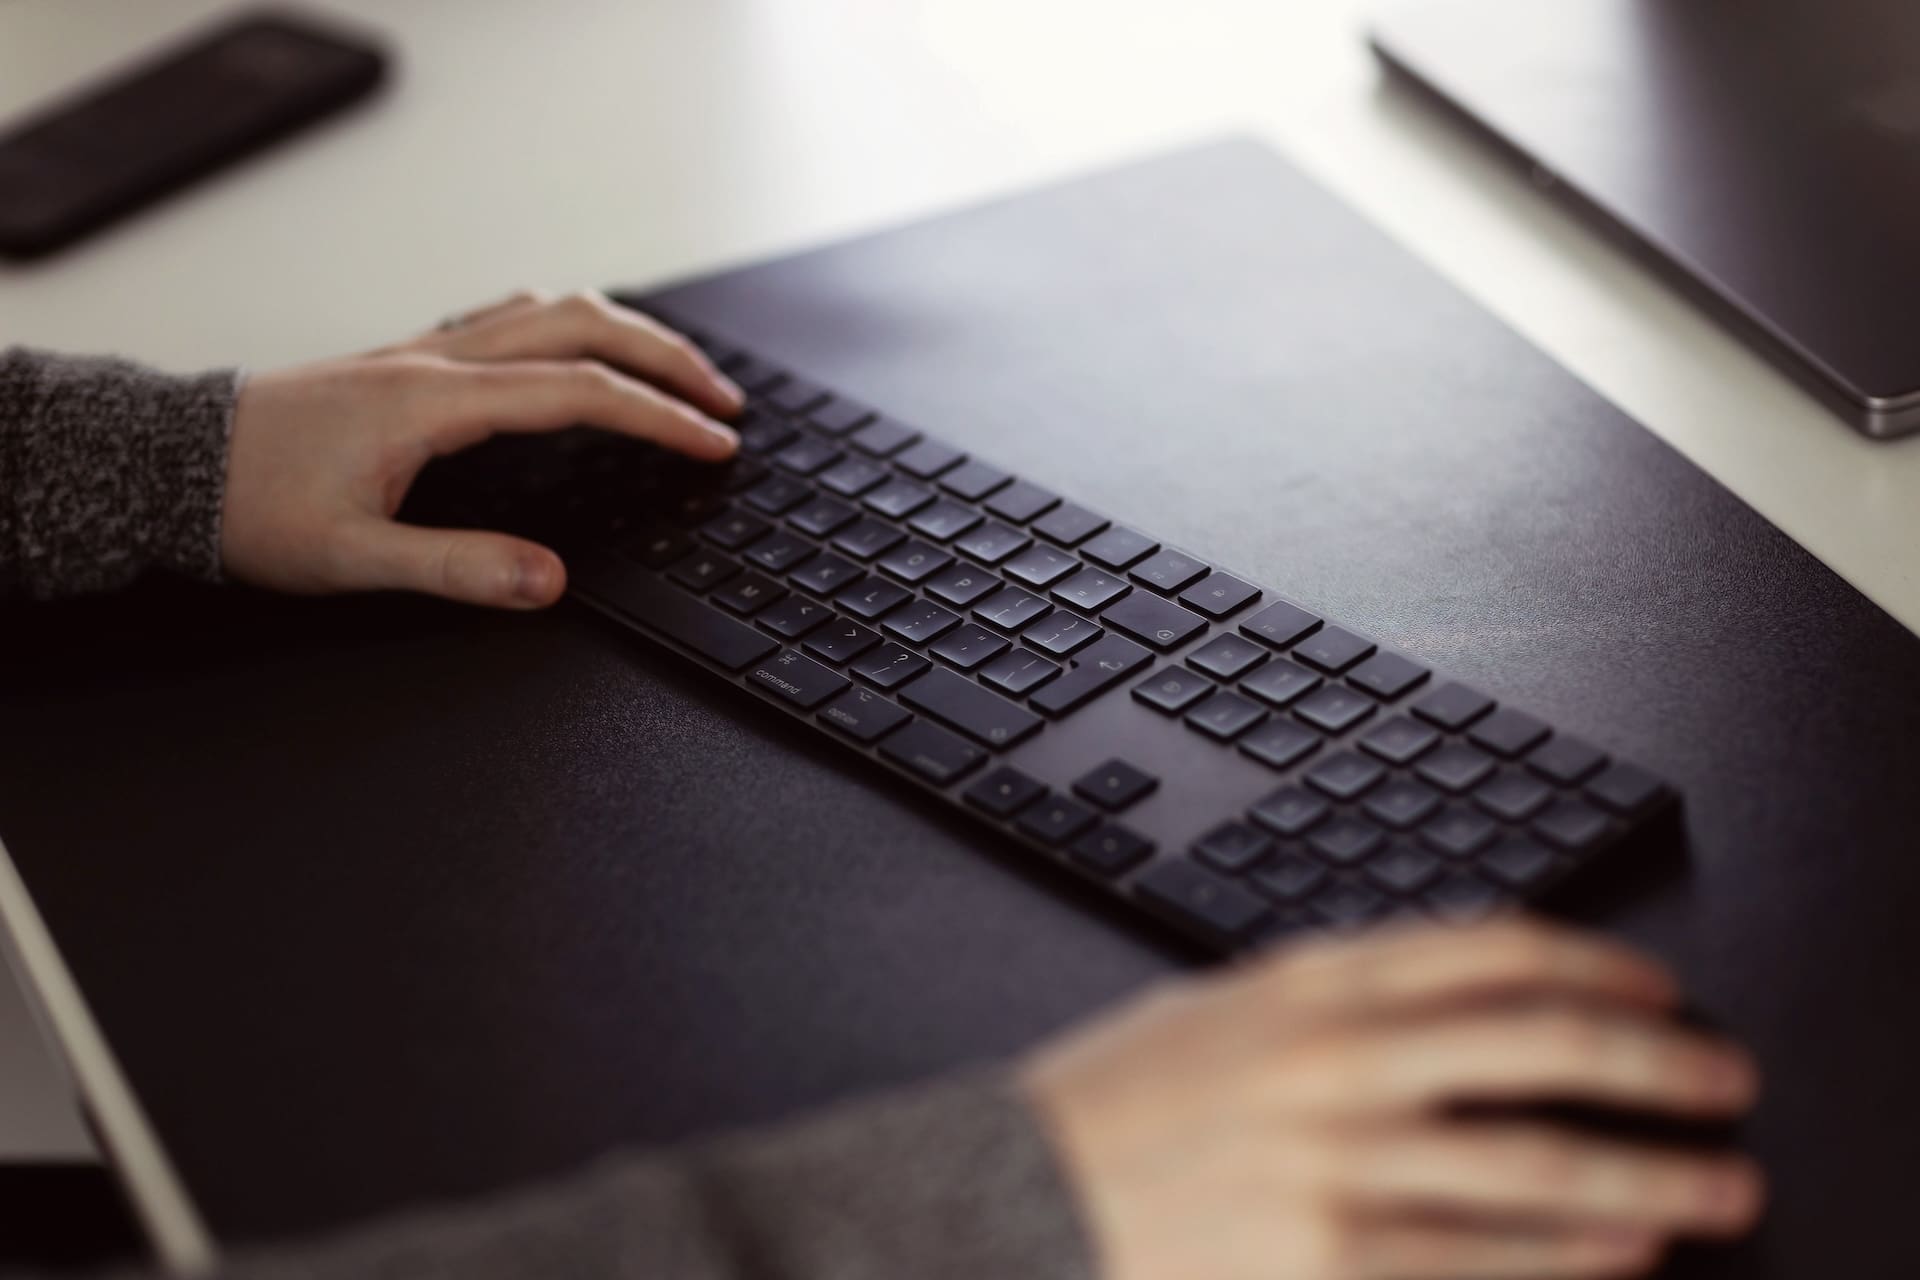 Hands poised over a black keyboard and mouse on a desk